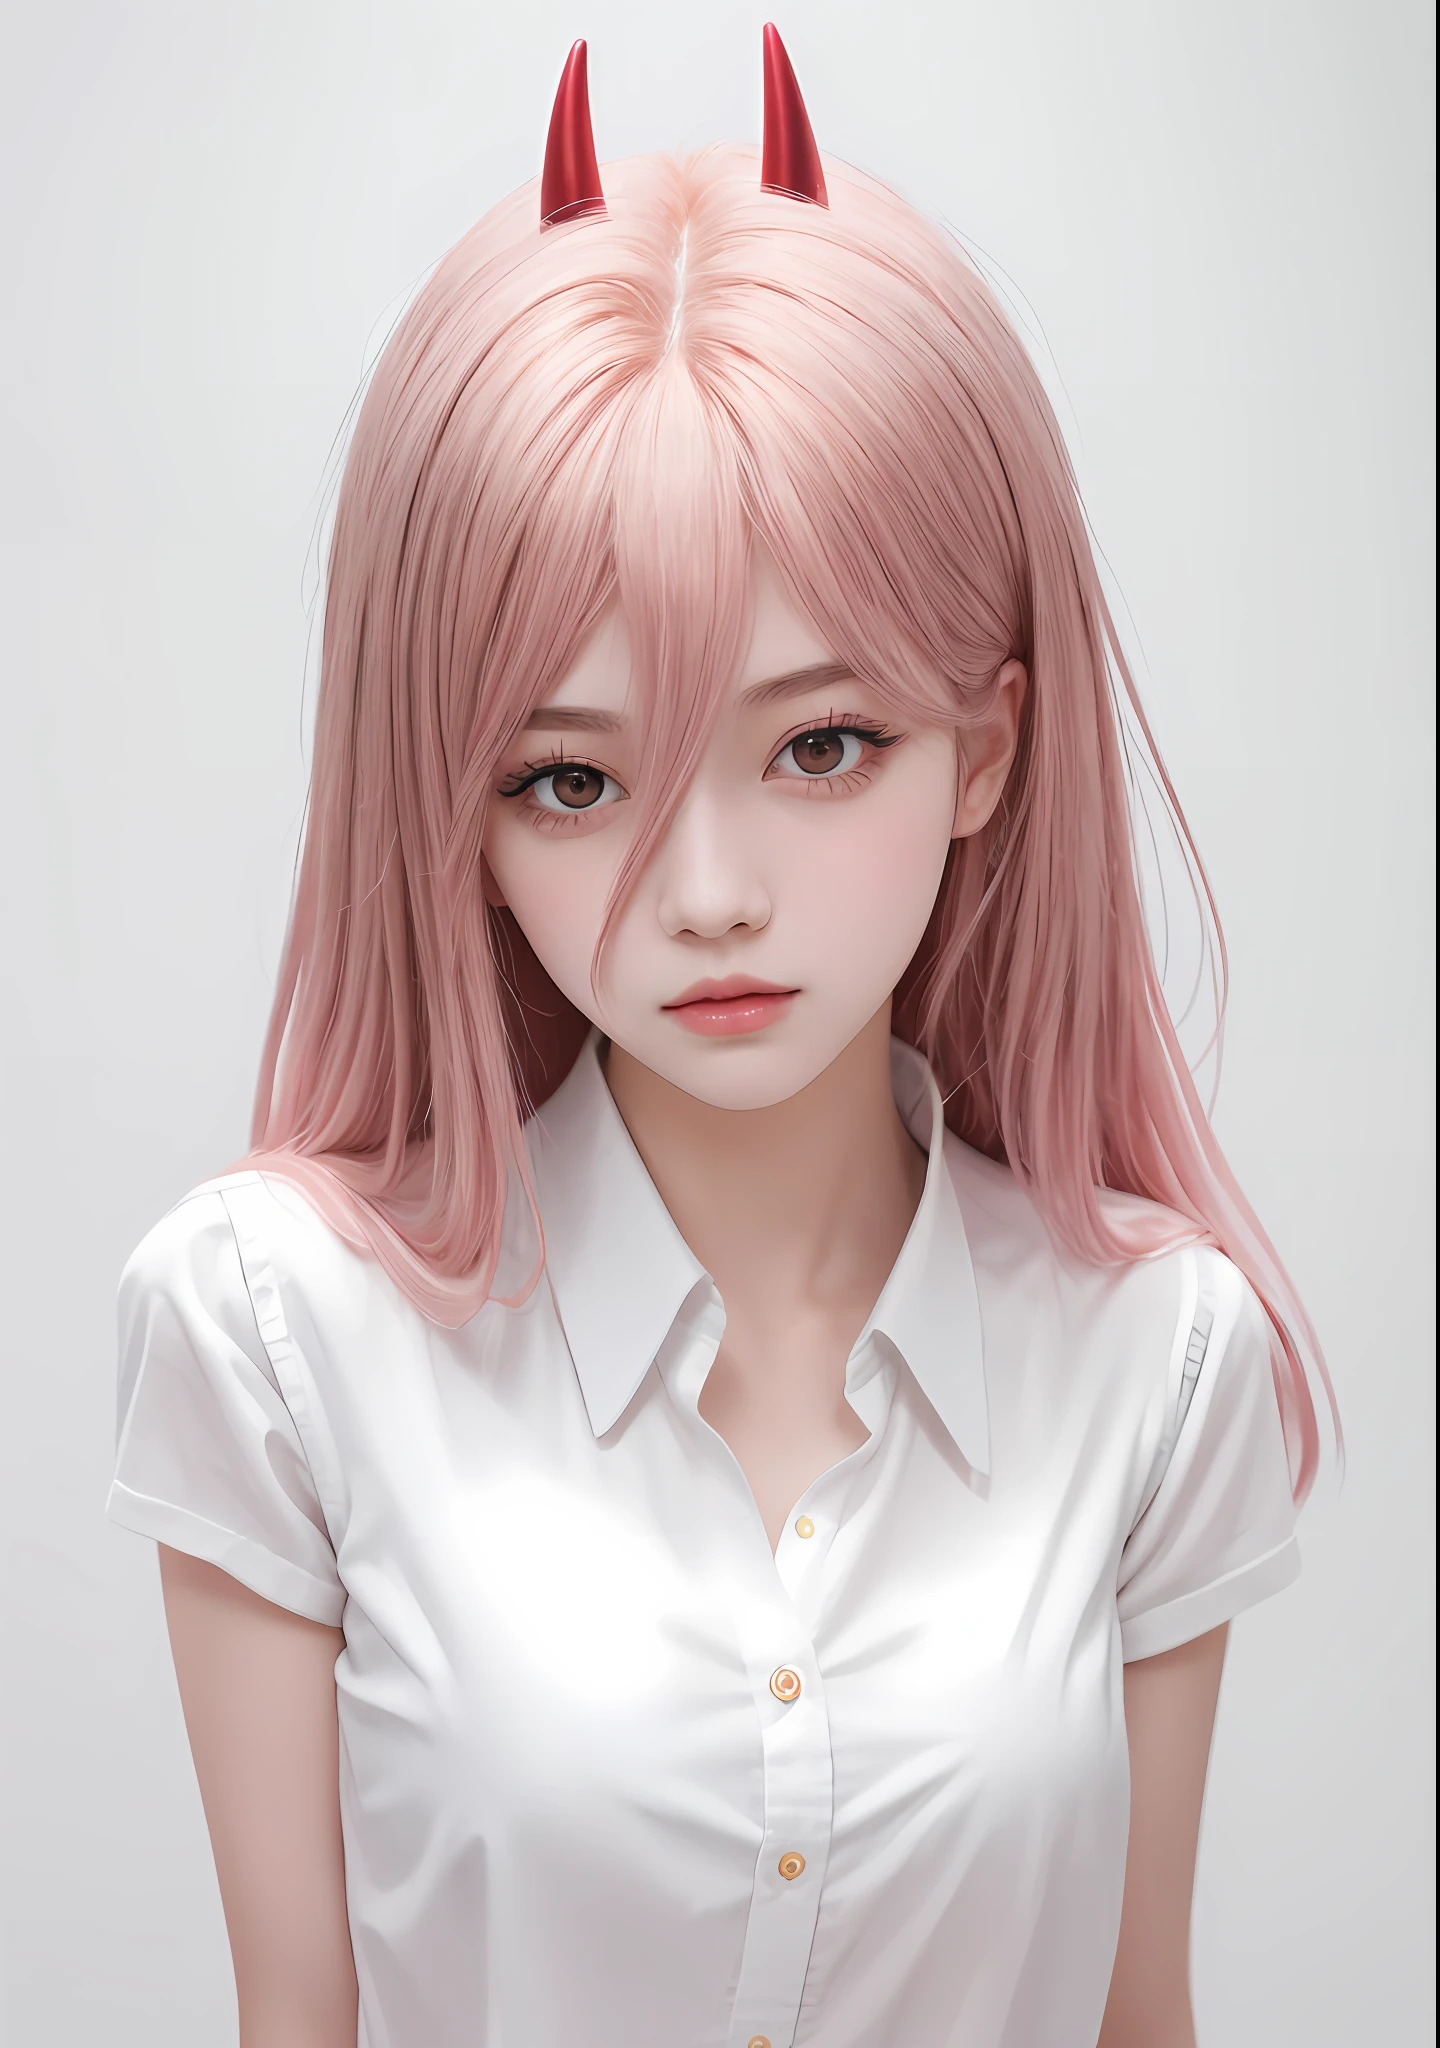 anime girl with pink hair and horns in white shirt, guweiz on pixiv artstation, cute anime girl portraits, extremely cute anime girl face, trending on artstation pixiv, realistic anime style at pixiv, guweiz on artstation pixiv, realistic young anime girl, clean detailed anime art, anime girl with long hair, realistic anime art style